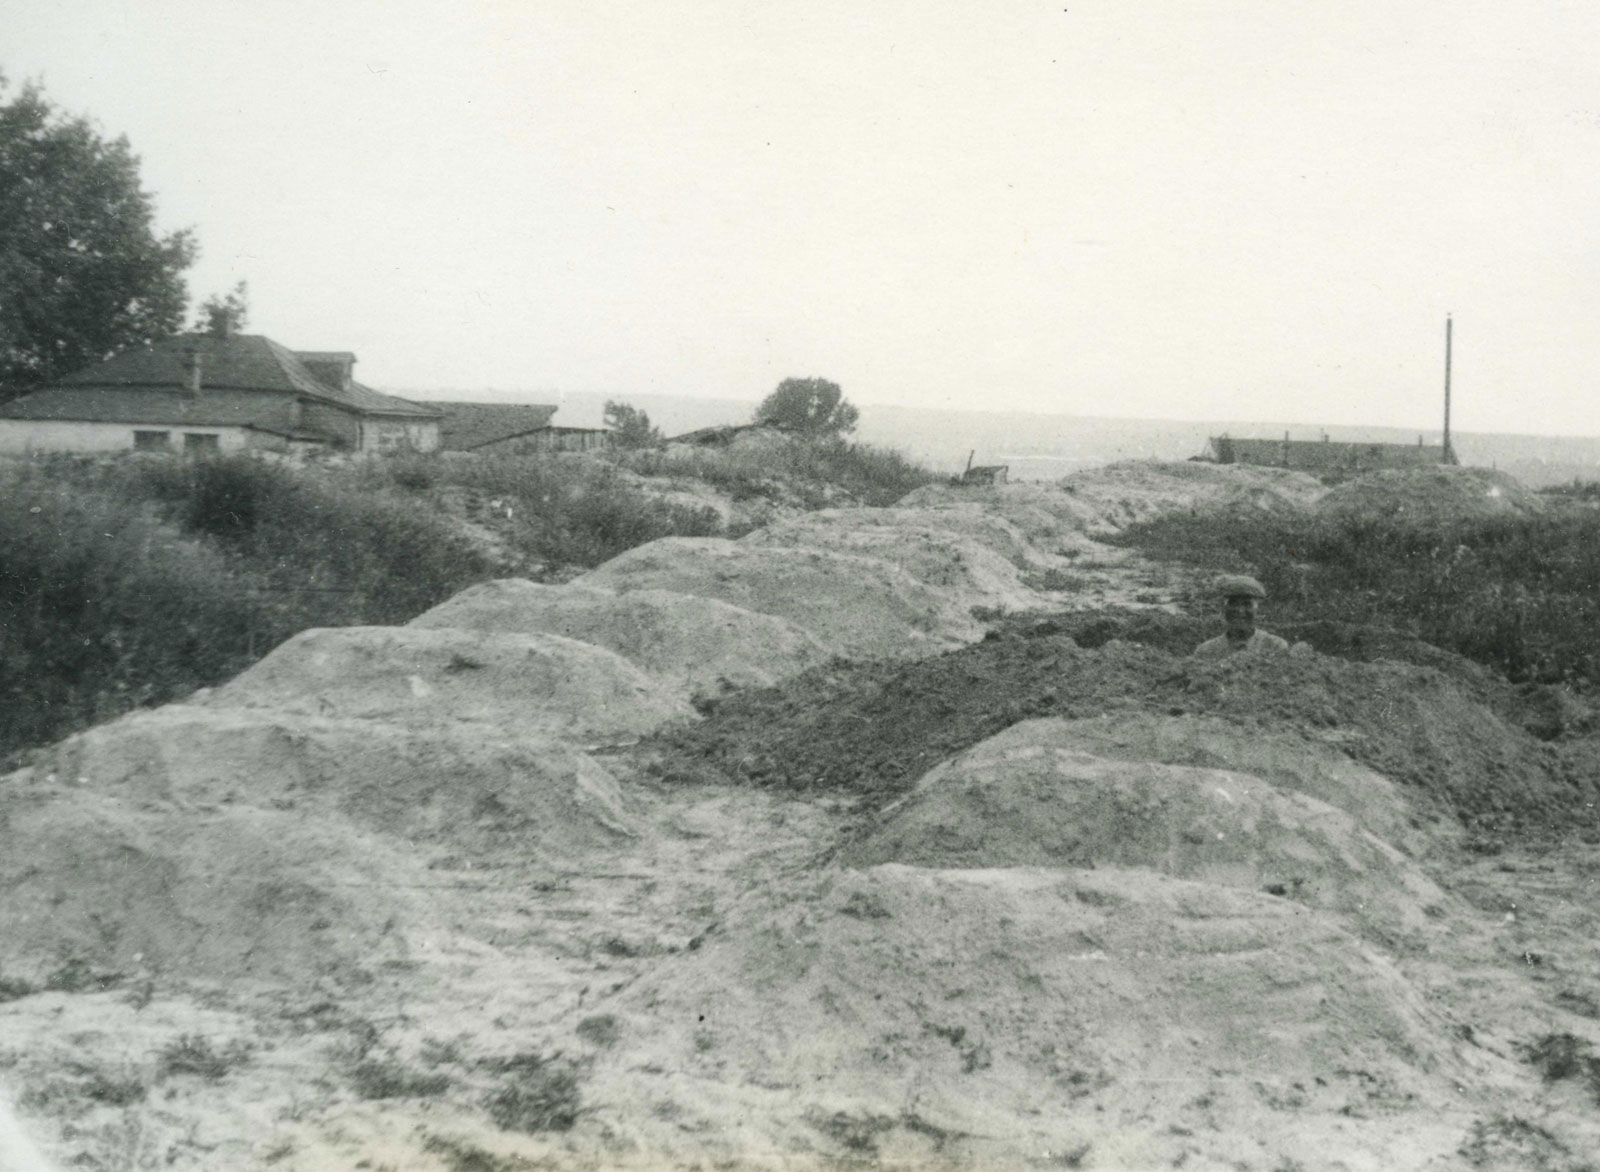 A black and white photo of several dirt mounds ordered in rows. The dirt mounds extend into the distance.